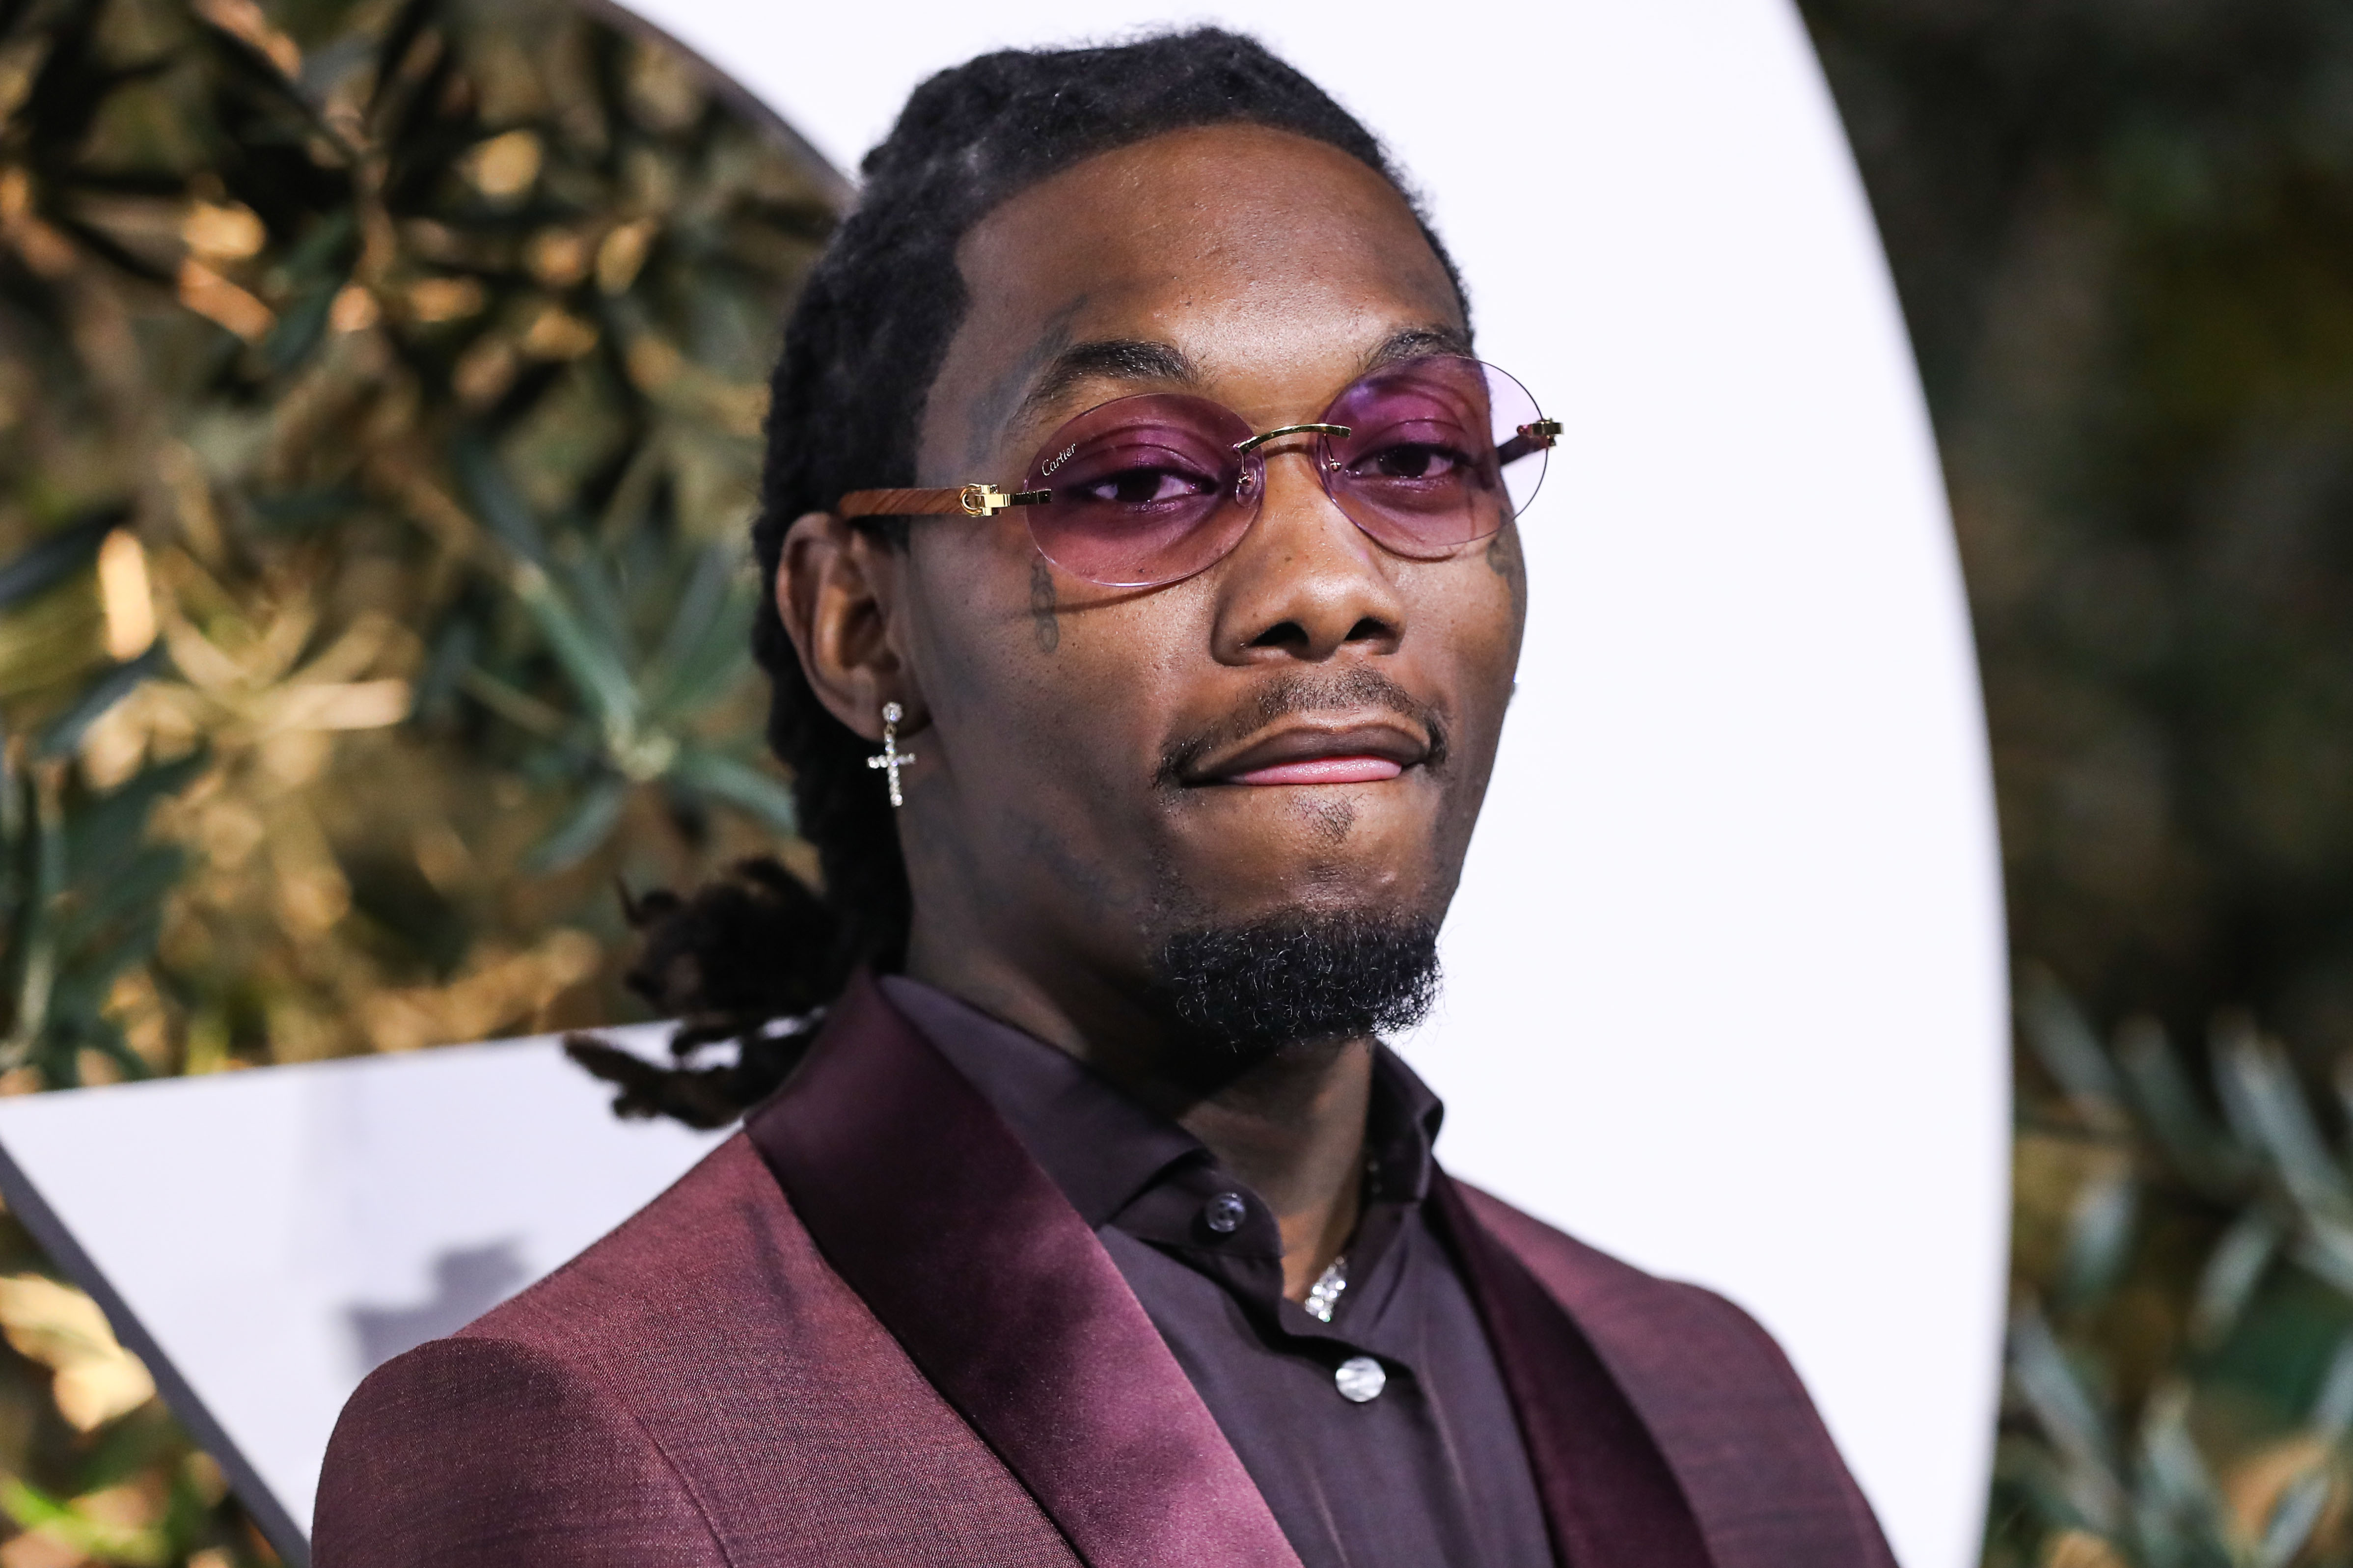 Rapper Offset arrives at the 2019 GQ Men Of The Year Party held at The West Hollywood EDITION Hotel on December 5, 2019 in West Hollywood, Los Angeles, California, United States.